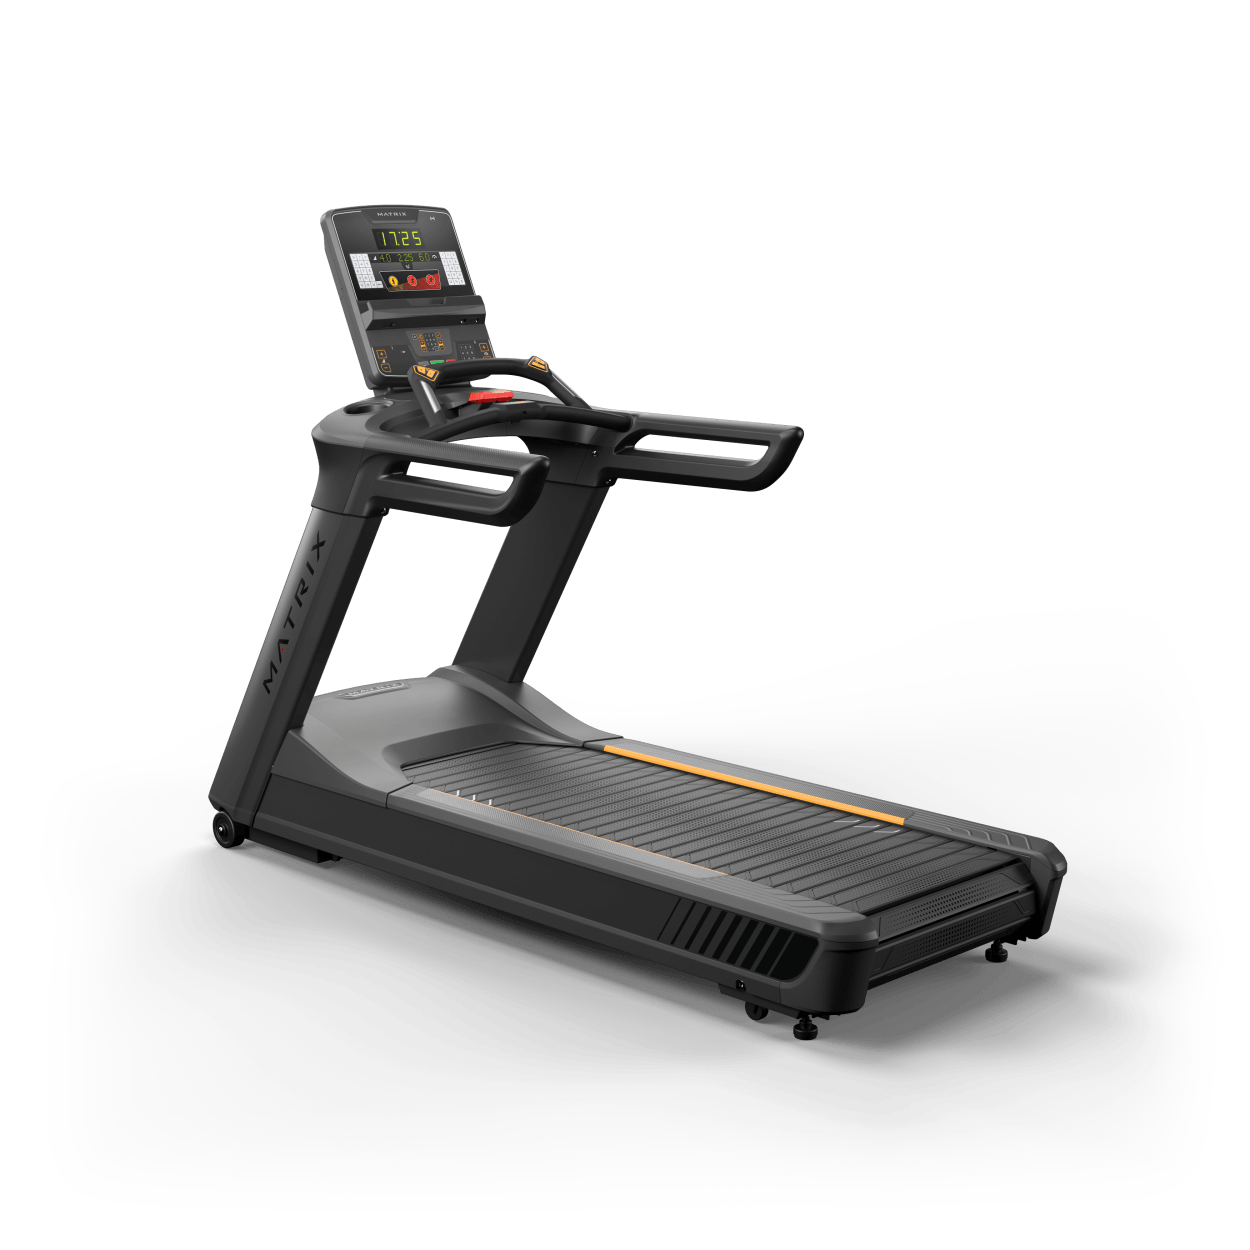 Matrix Fitness Performance Plus Treadmill with Group Training LED Console full view | Fitness Experience